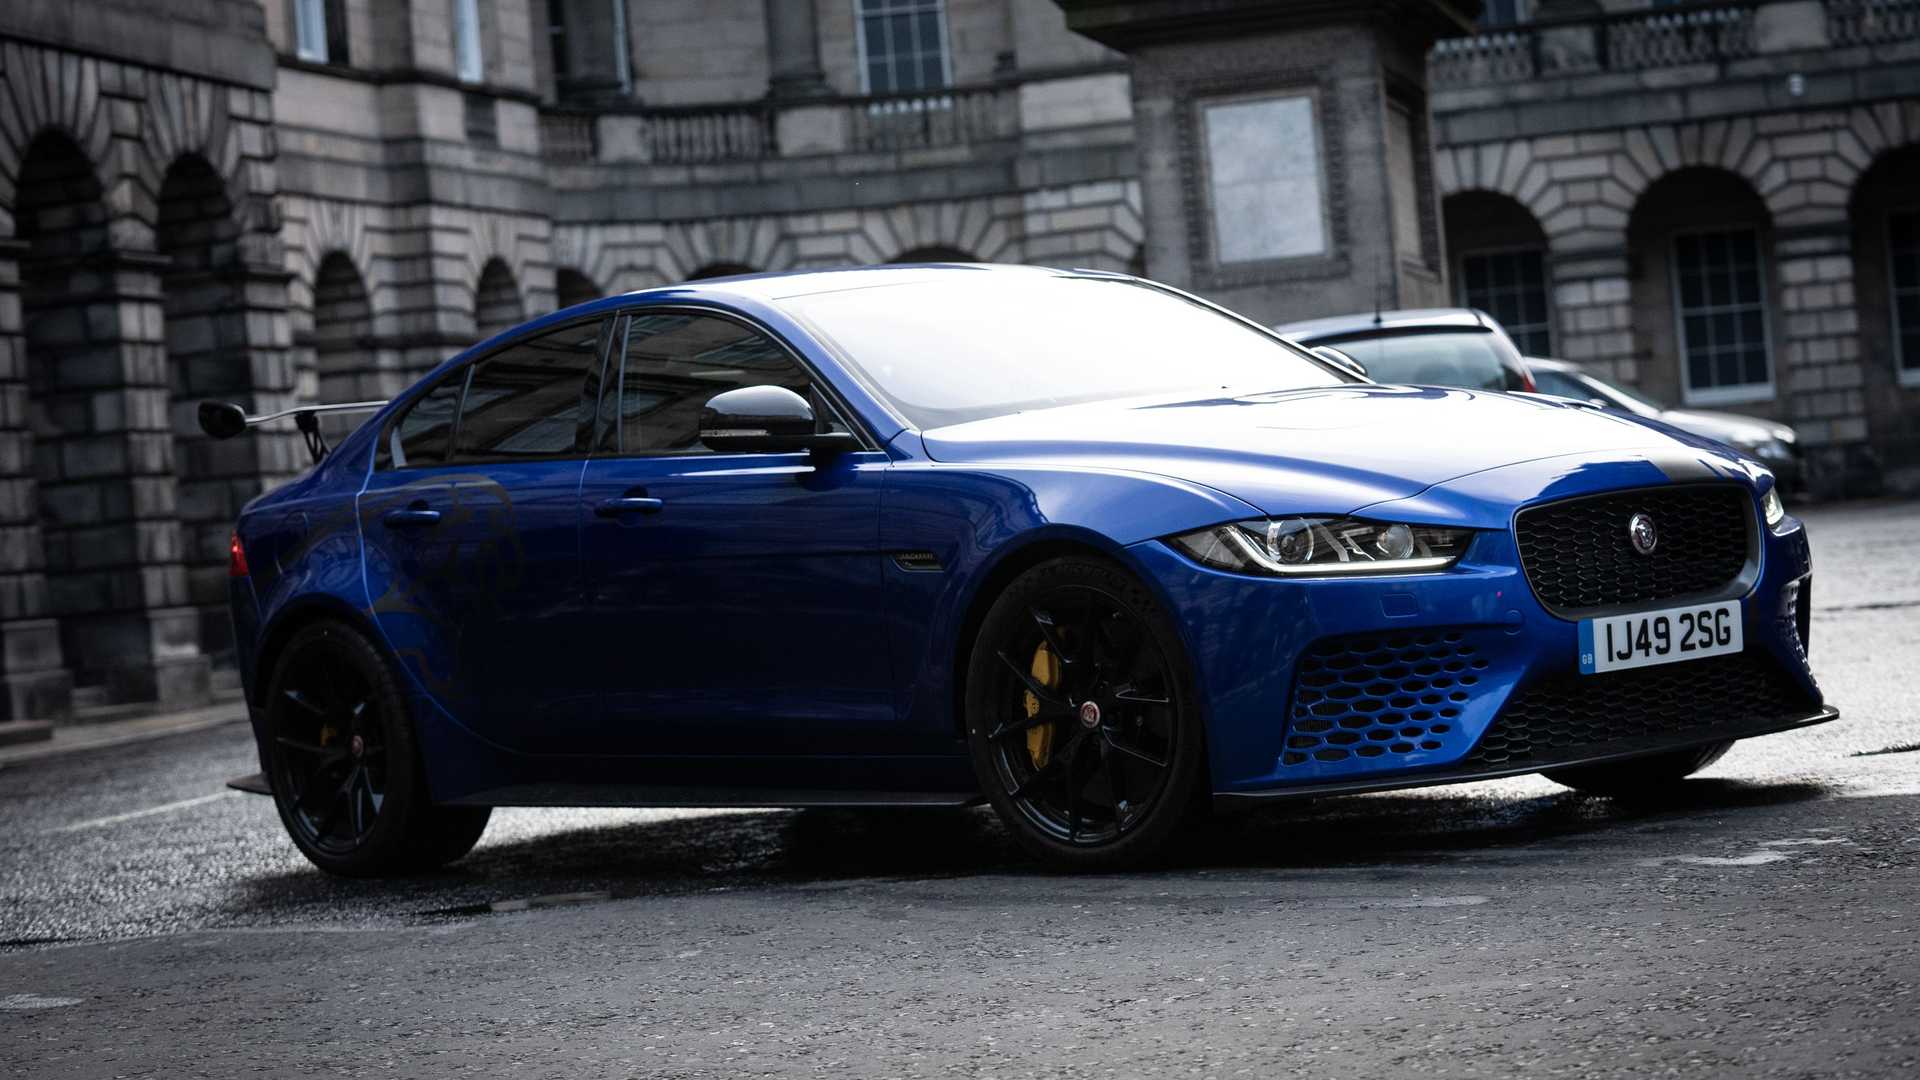 https://static.wikia.nocookie.net/fastandfurious/images/7/7a/Otto-s-jaguar-xe-project-8.jpg/revision/latest?cb=20210618060737